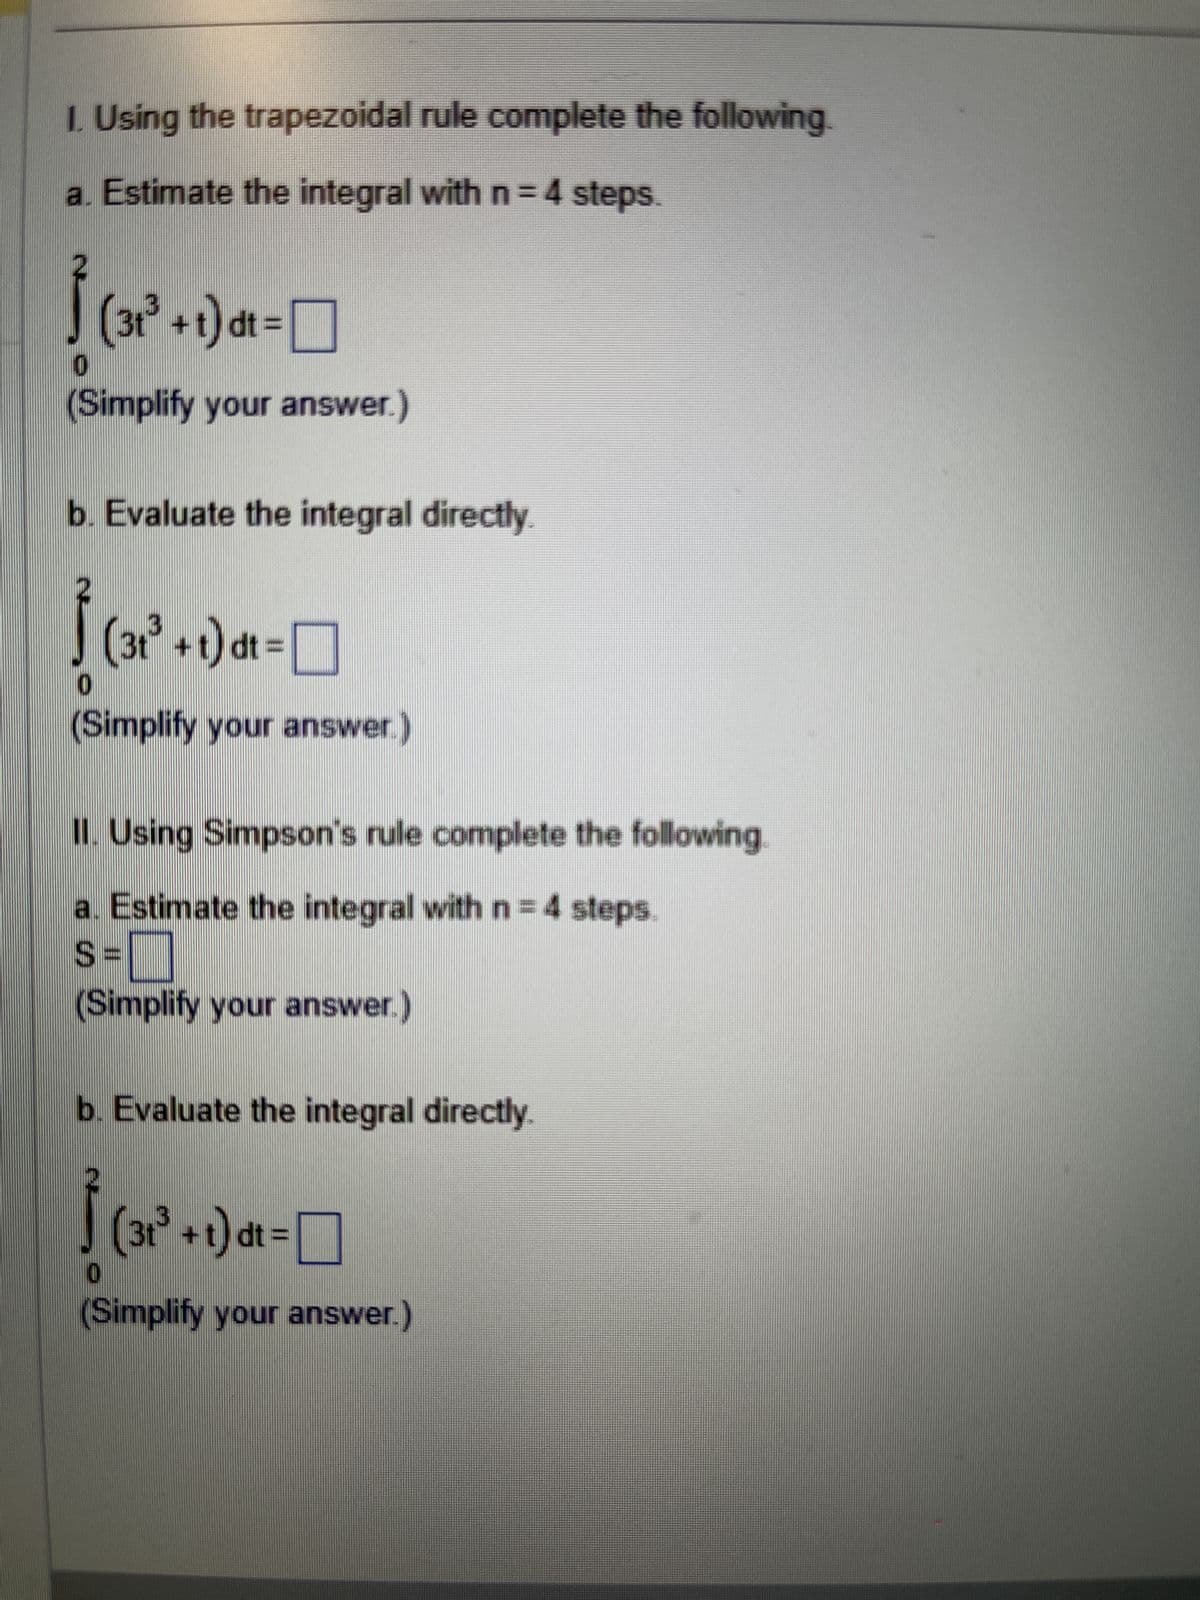 I. Using the trapezoidal rule complete the following.
a. Estimate the integral with n = 4 steps.
√
0
(31³ +t)dt =
(Simplify your answer.)
b. Evaluate the integral directly.
√
(3t³ +t) dt =
(Simplify your answer.)
II. Using Simpson's rule complete the following
a. Estimate the integral with n = 4 steps.
S=
(Simplify your answer.)
b. Evaluate the integral directly.
0
(3t³ +t)dt =
☐
(Simplify your answer.)